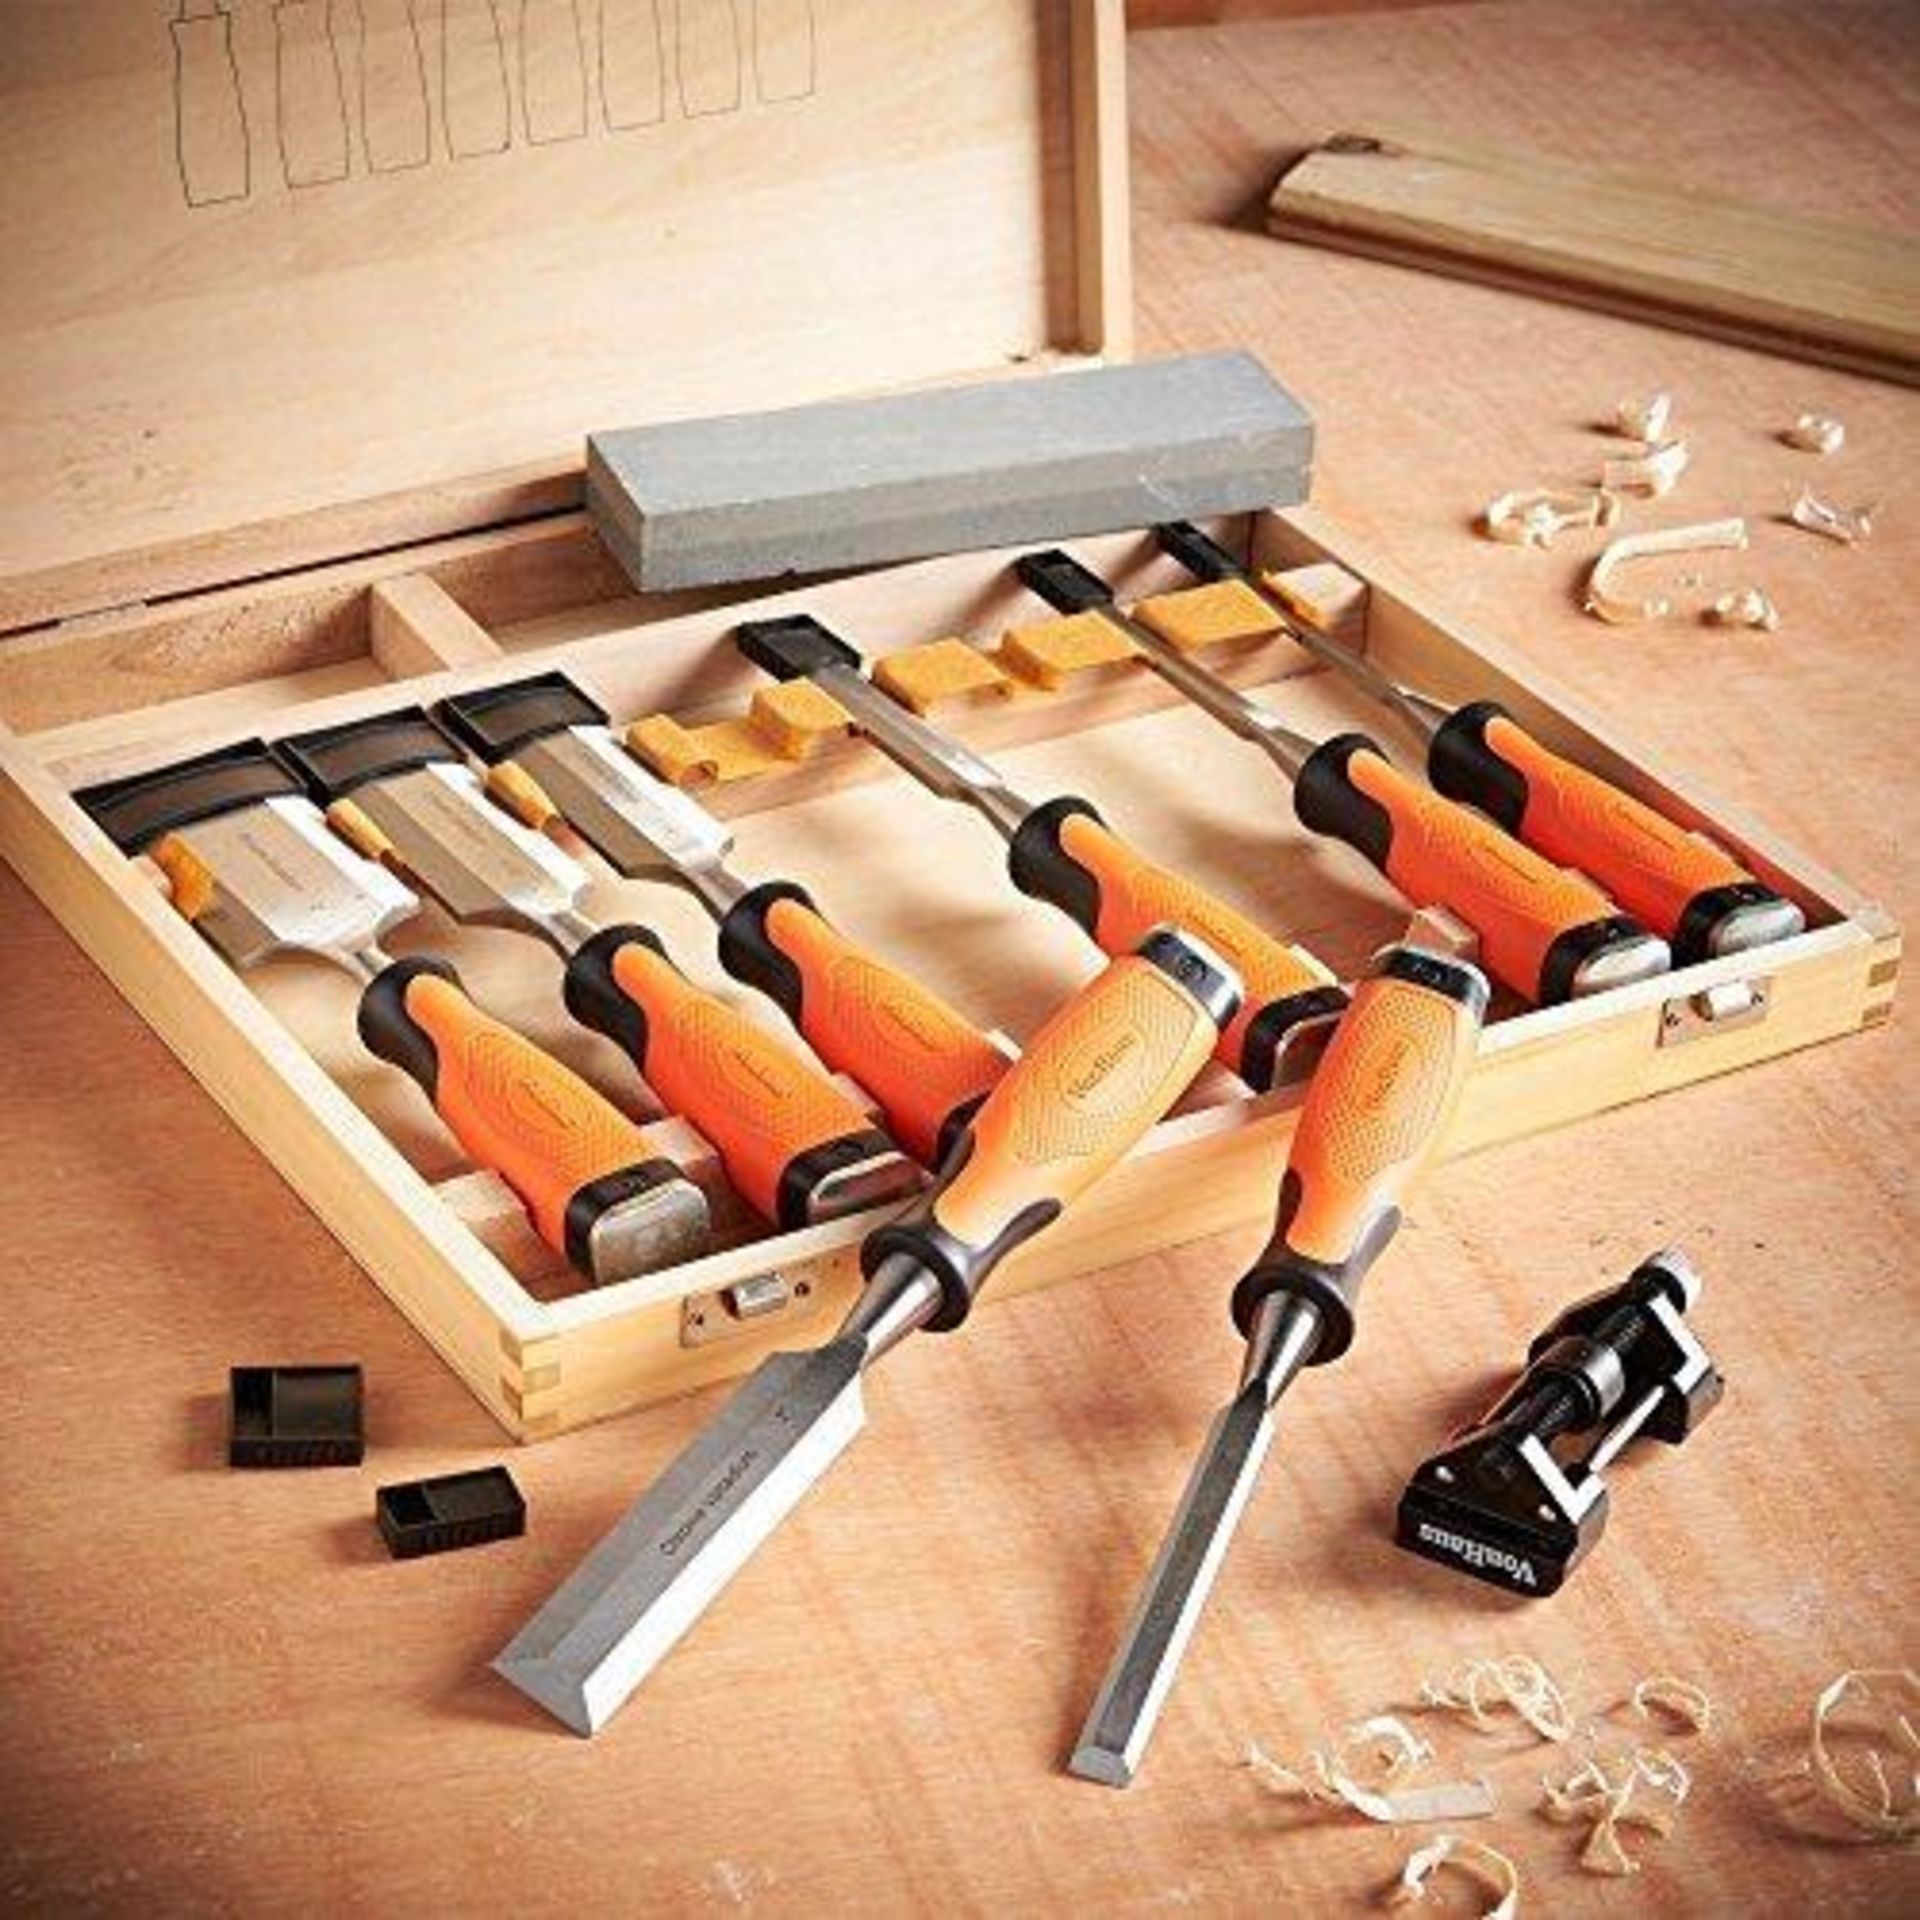 10pc Wood Chisel Set - ER7. Luxury 10pc Wood Chisel SetThis Luxury Chisel Set is just the job for